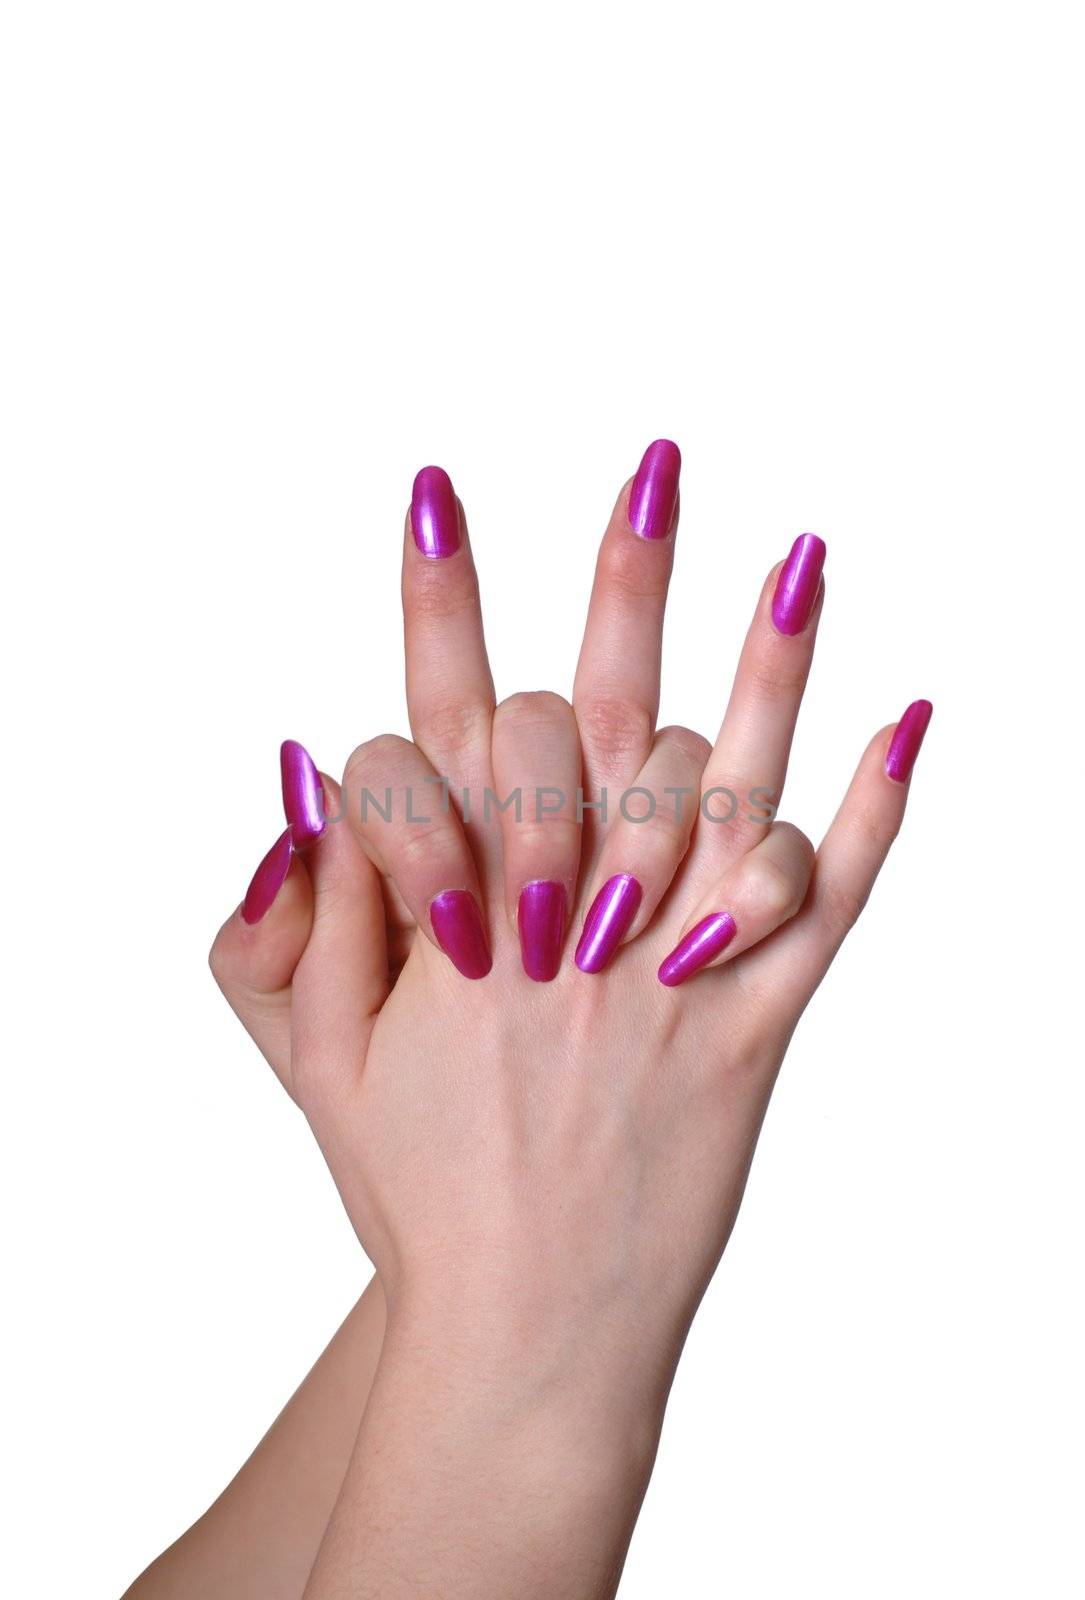 Manicured Nails by Editorial